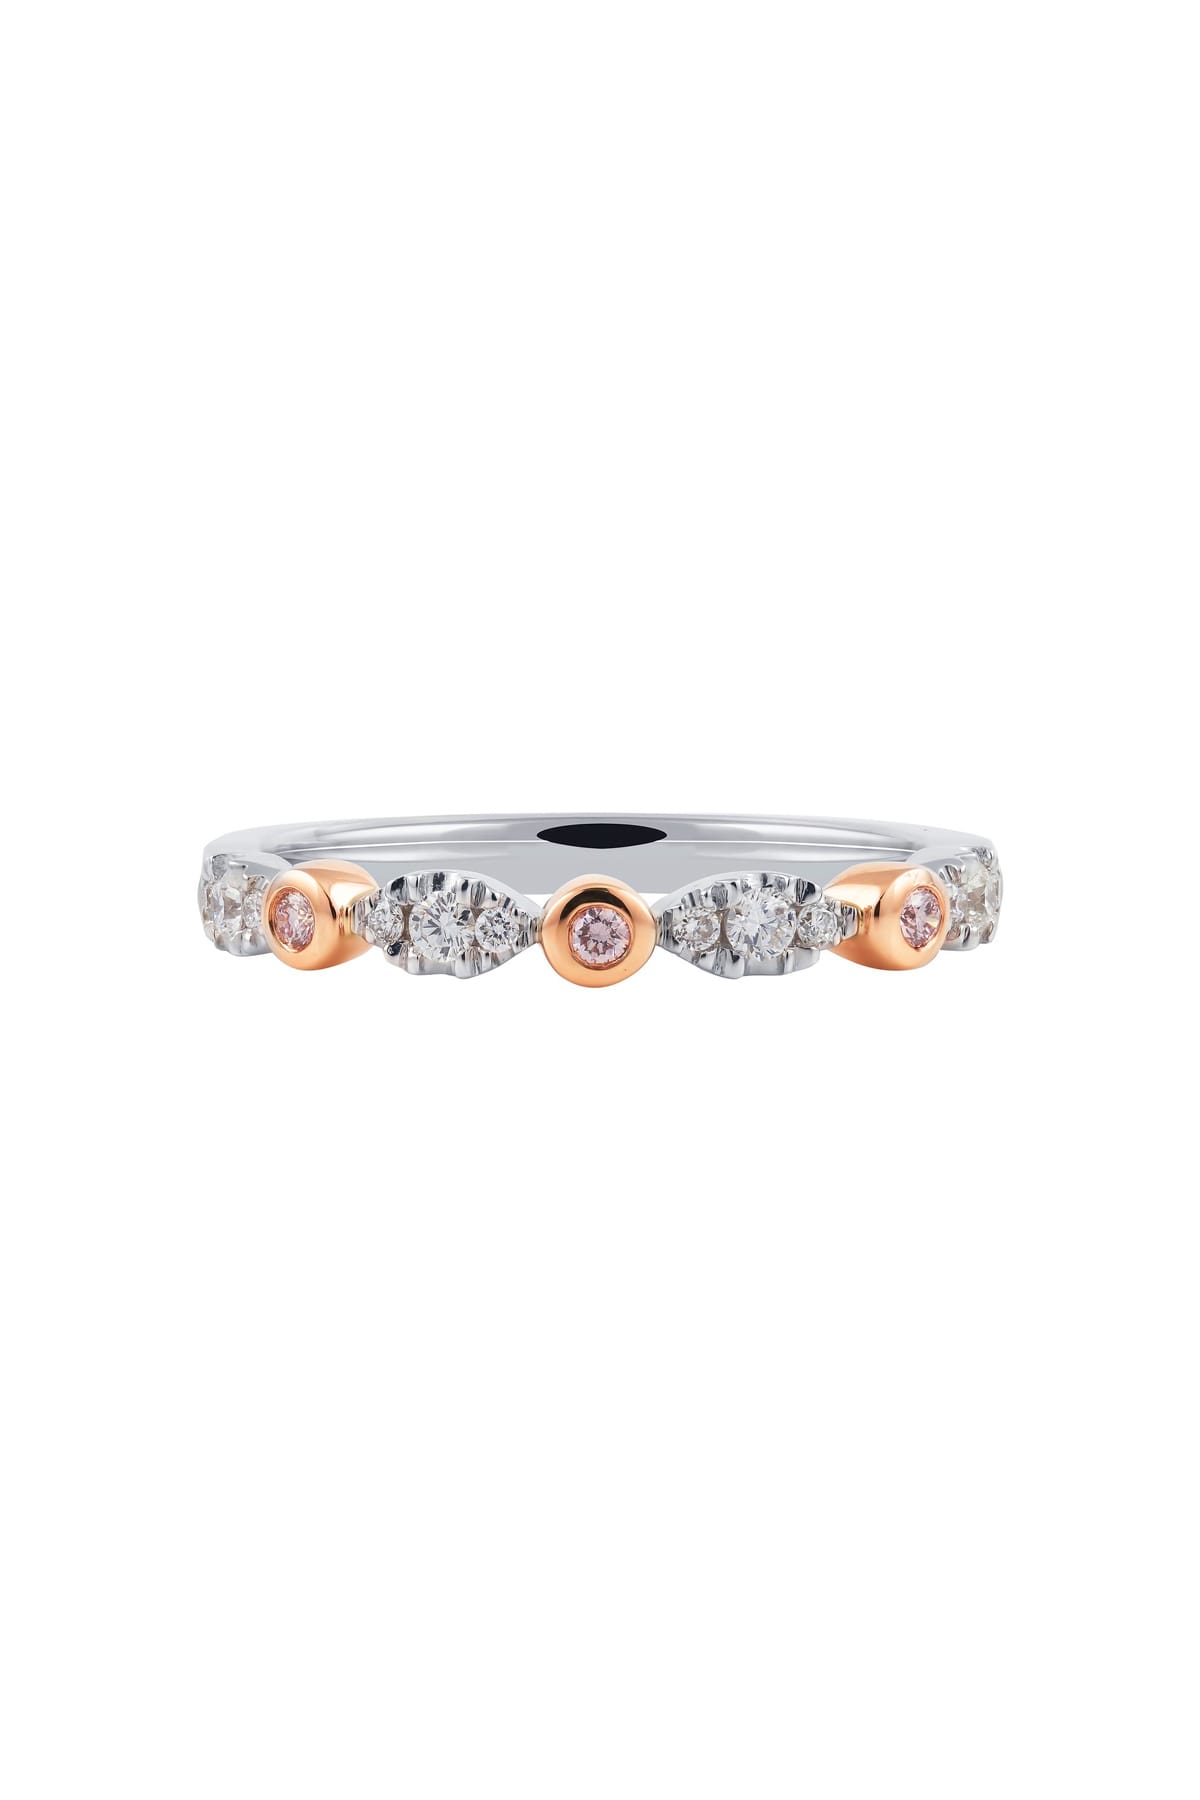 Argyle Pink And White Diamond Scalloped Band set in 18ct White and Rose Gold available at LeGassick Diamonds and Jewellery Gold Coast, Australia.